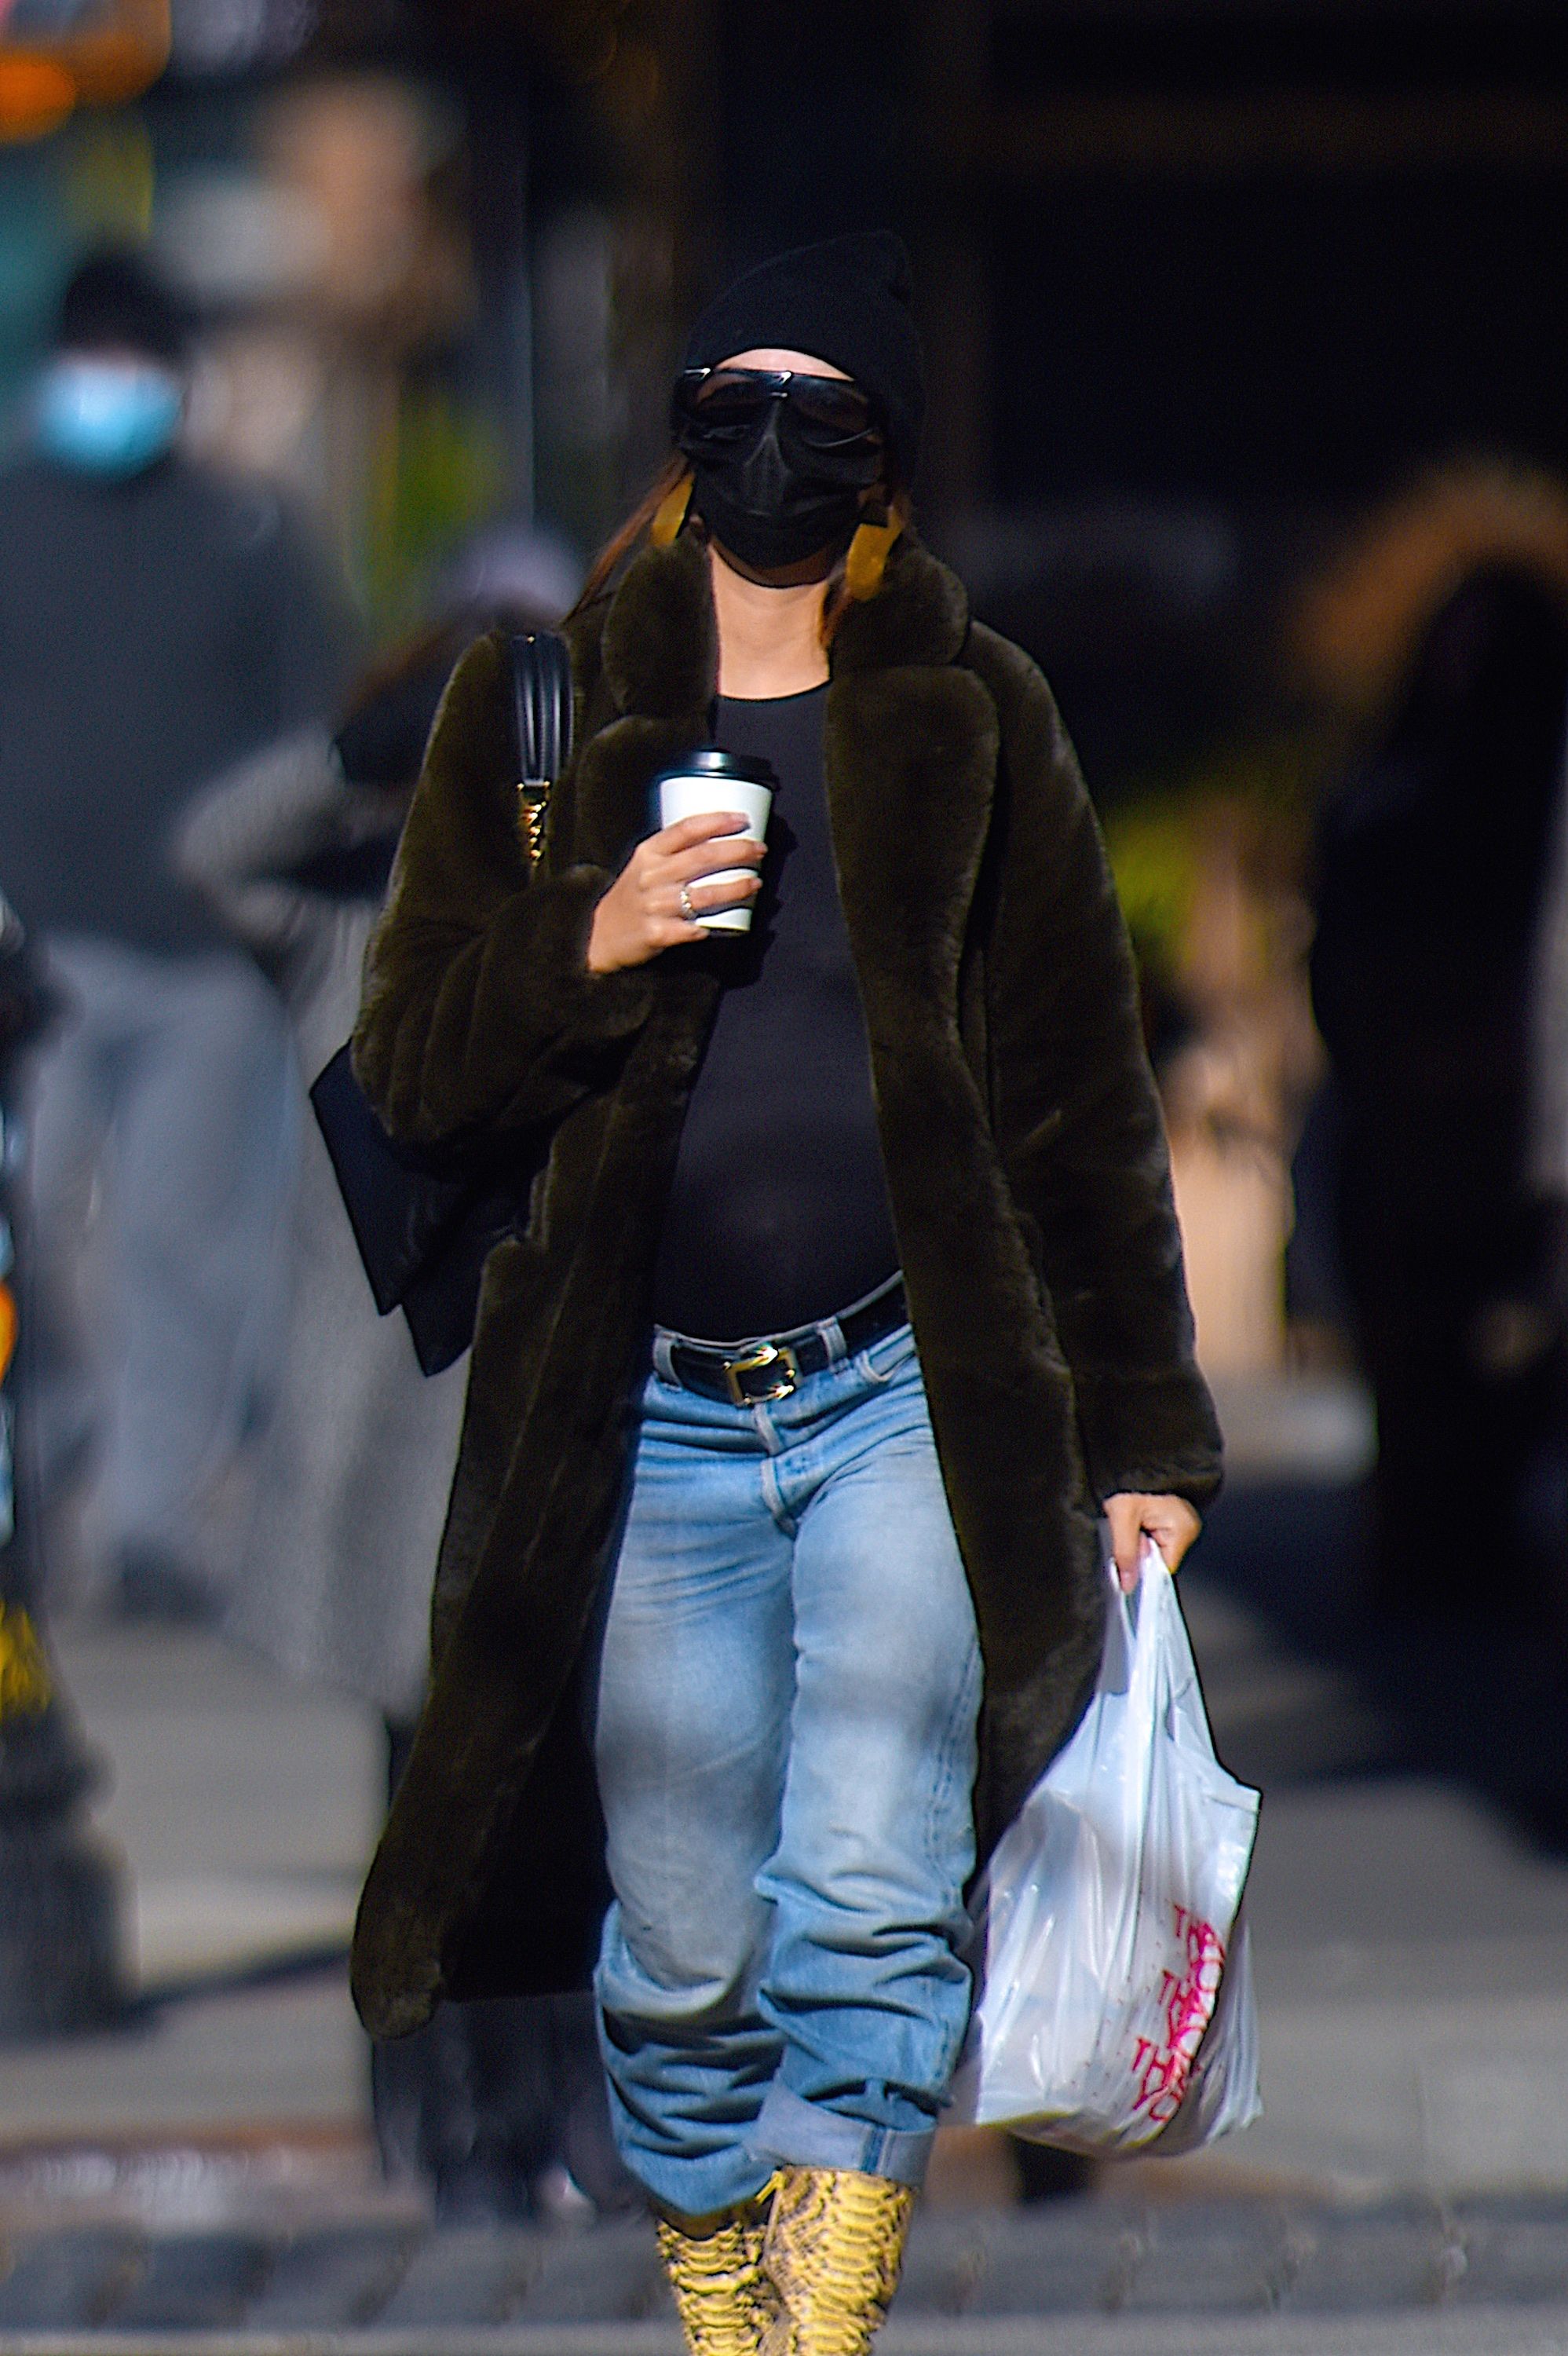 Emily Ratajkowski's Latest Chic Maternity Look Includes a Faux Fur Coat and Yellow Yeezy Boots